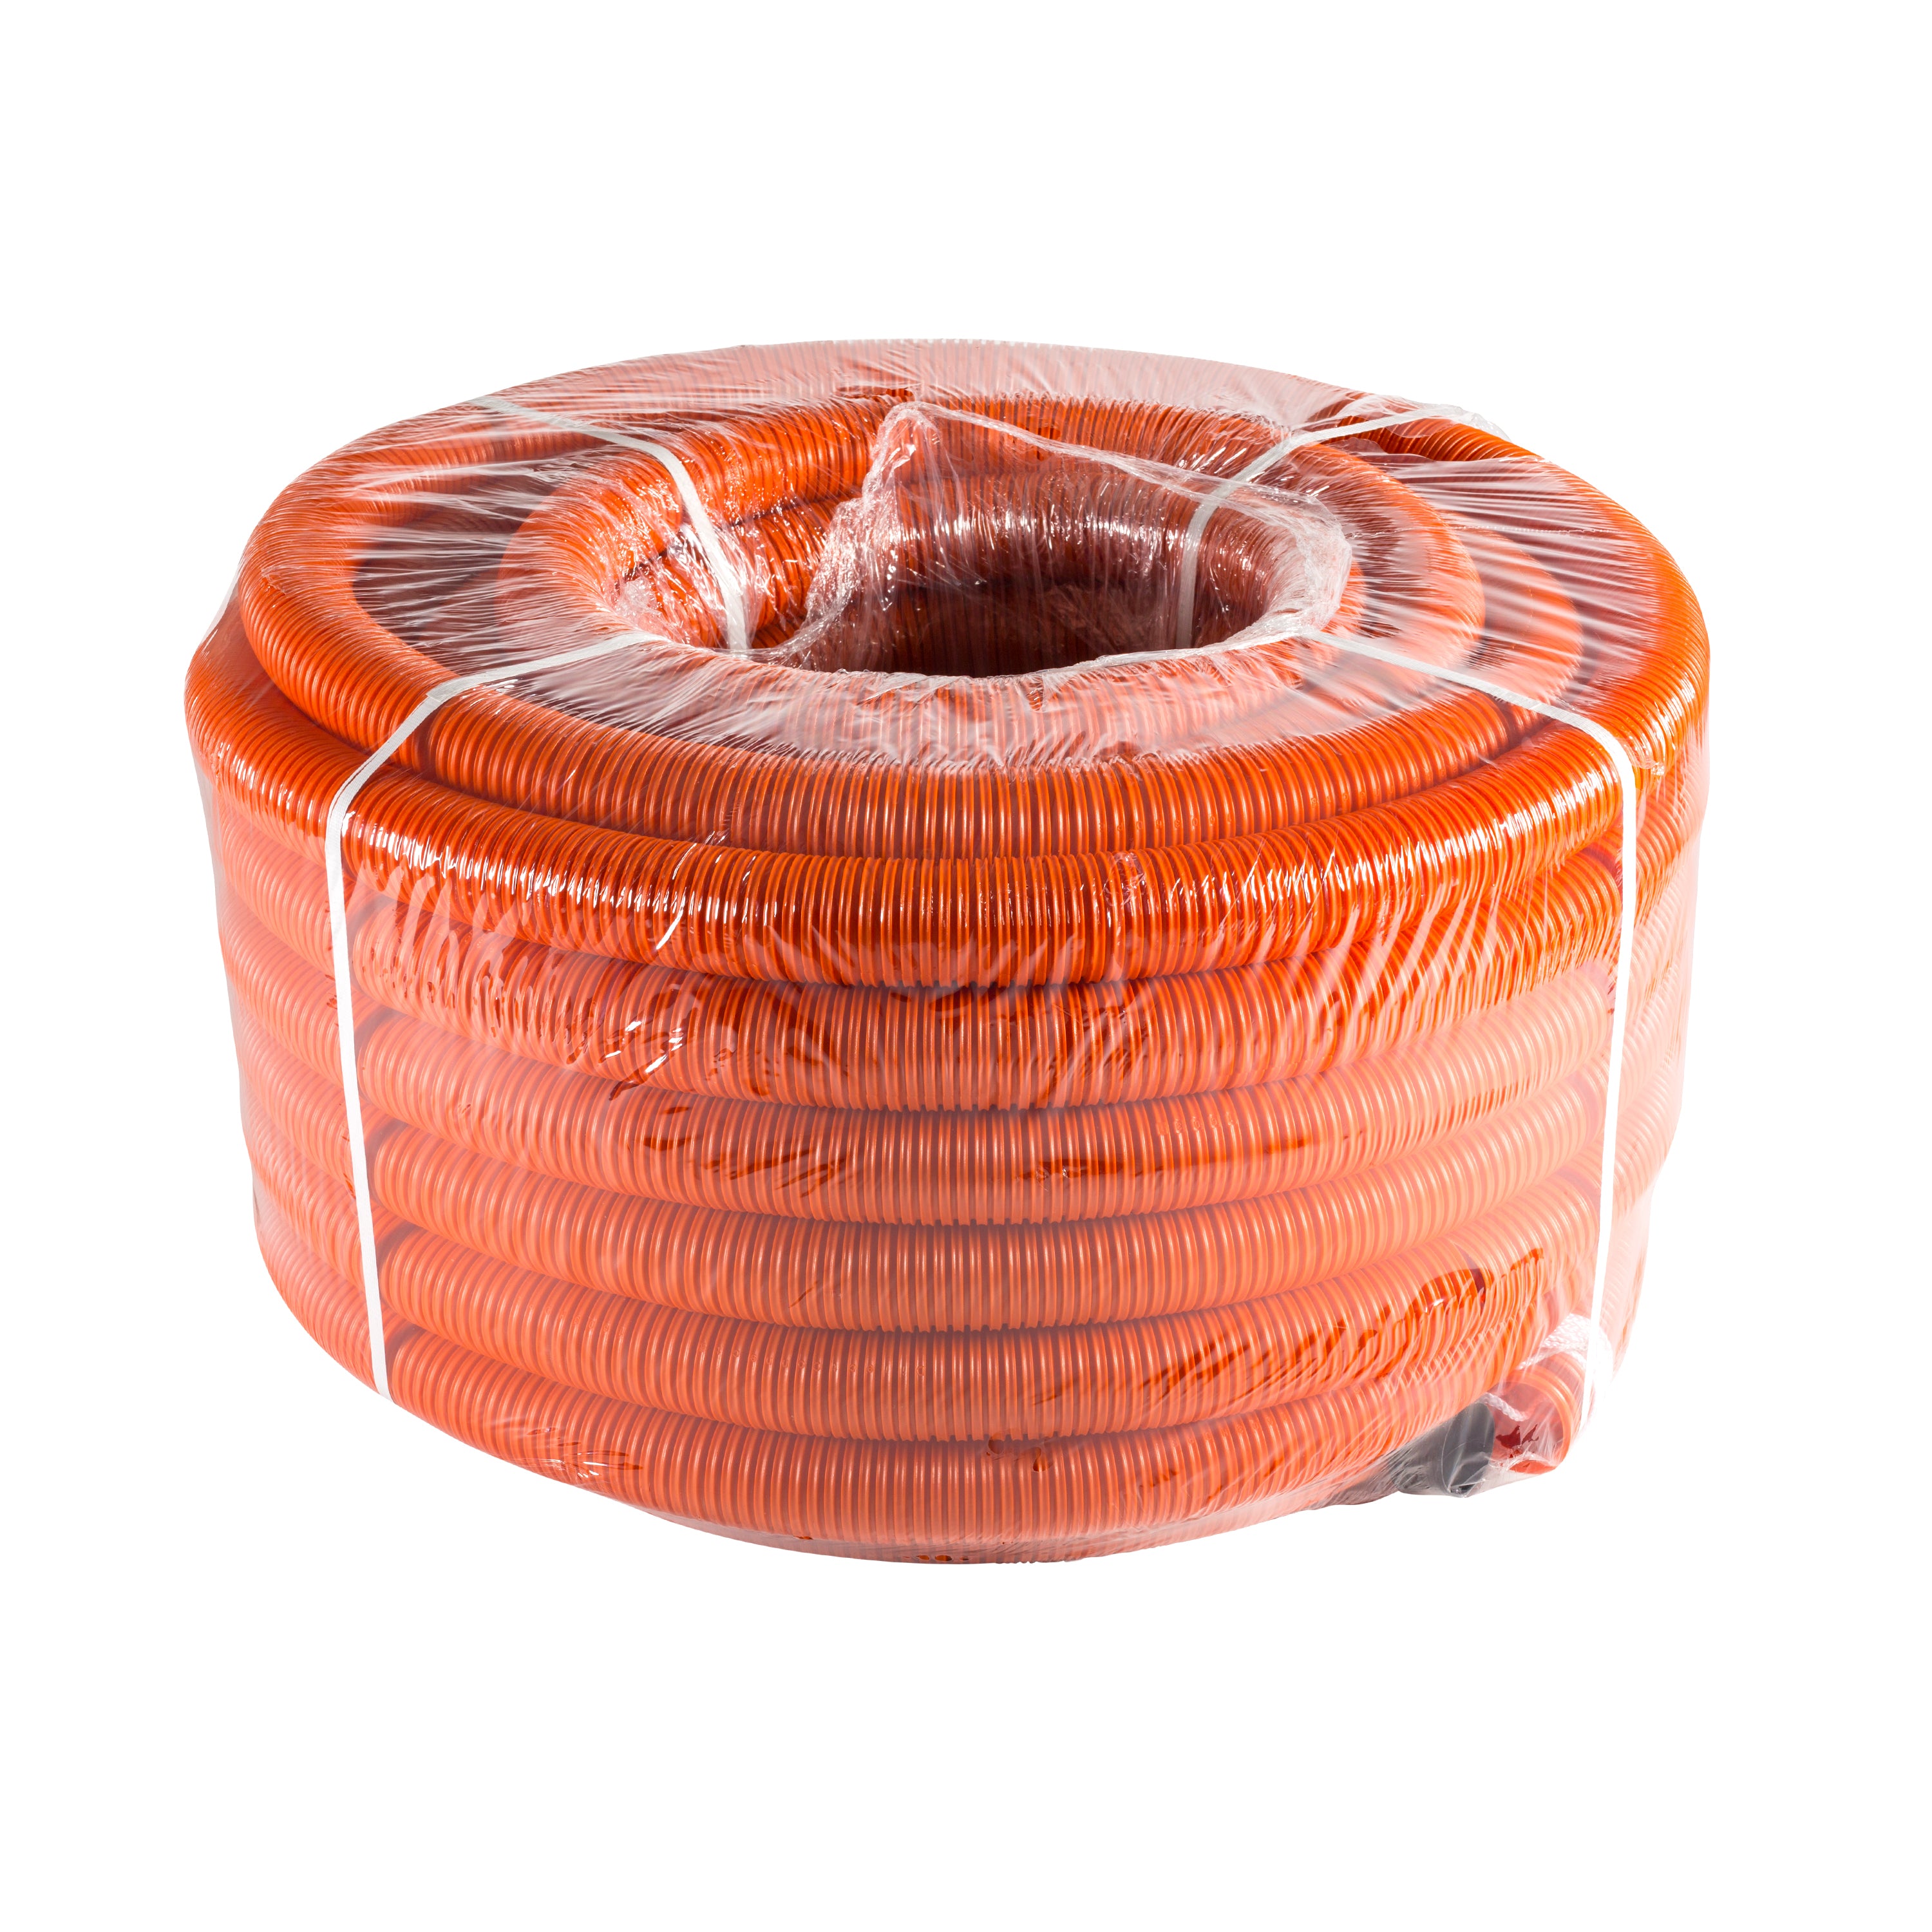 Direct Connect, DCPC200-H150  DirectConnect™, 2" Conduit, 150', w/Pull String, Orange HDPE, for Low Voltage Wire